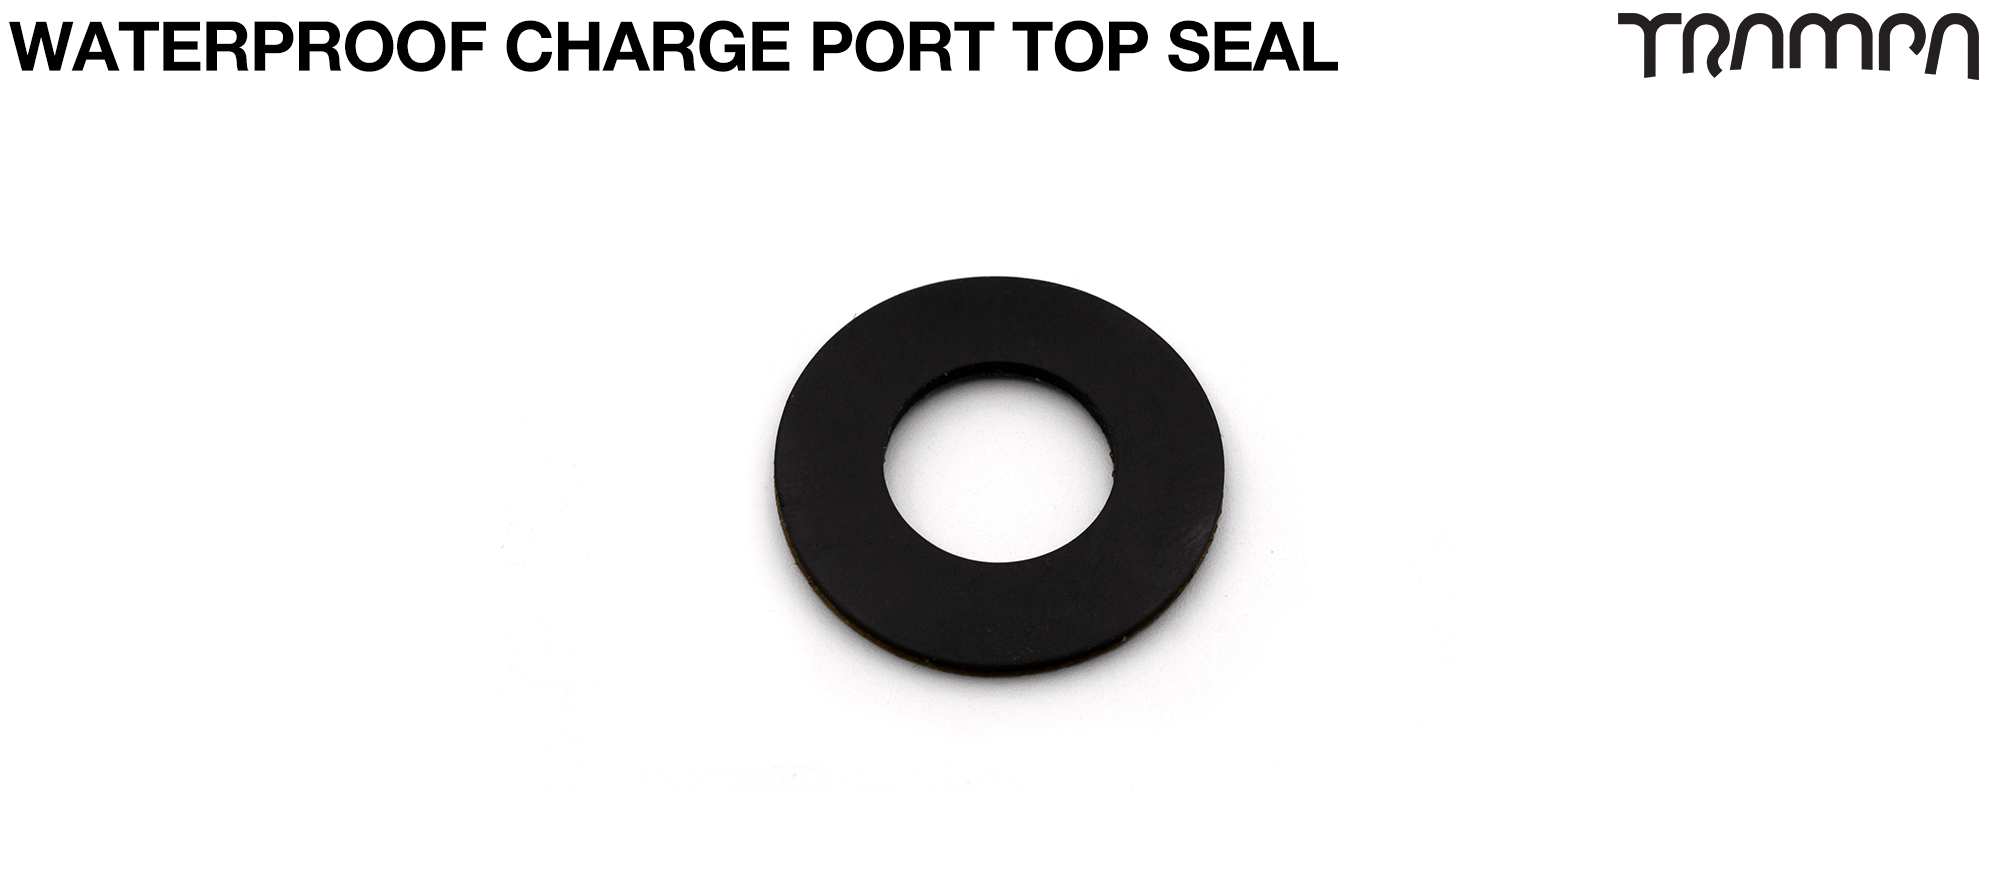 ORRSOM GT STICKY Backed Charge Port Rubber FLAT Ring CAP SEAL made from NBR Rubber 12x23.3x 1mm Used for Waterproofing the Charge port